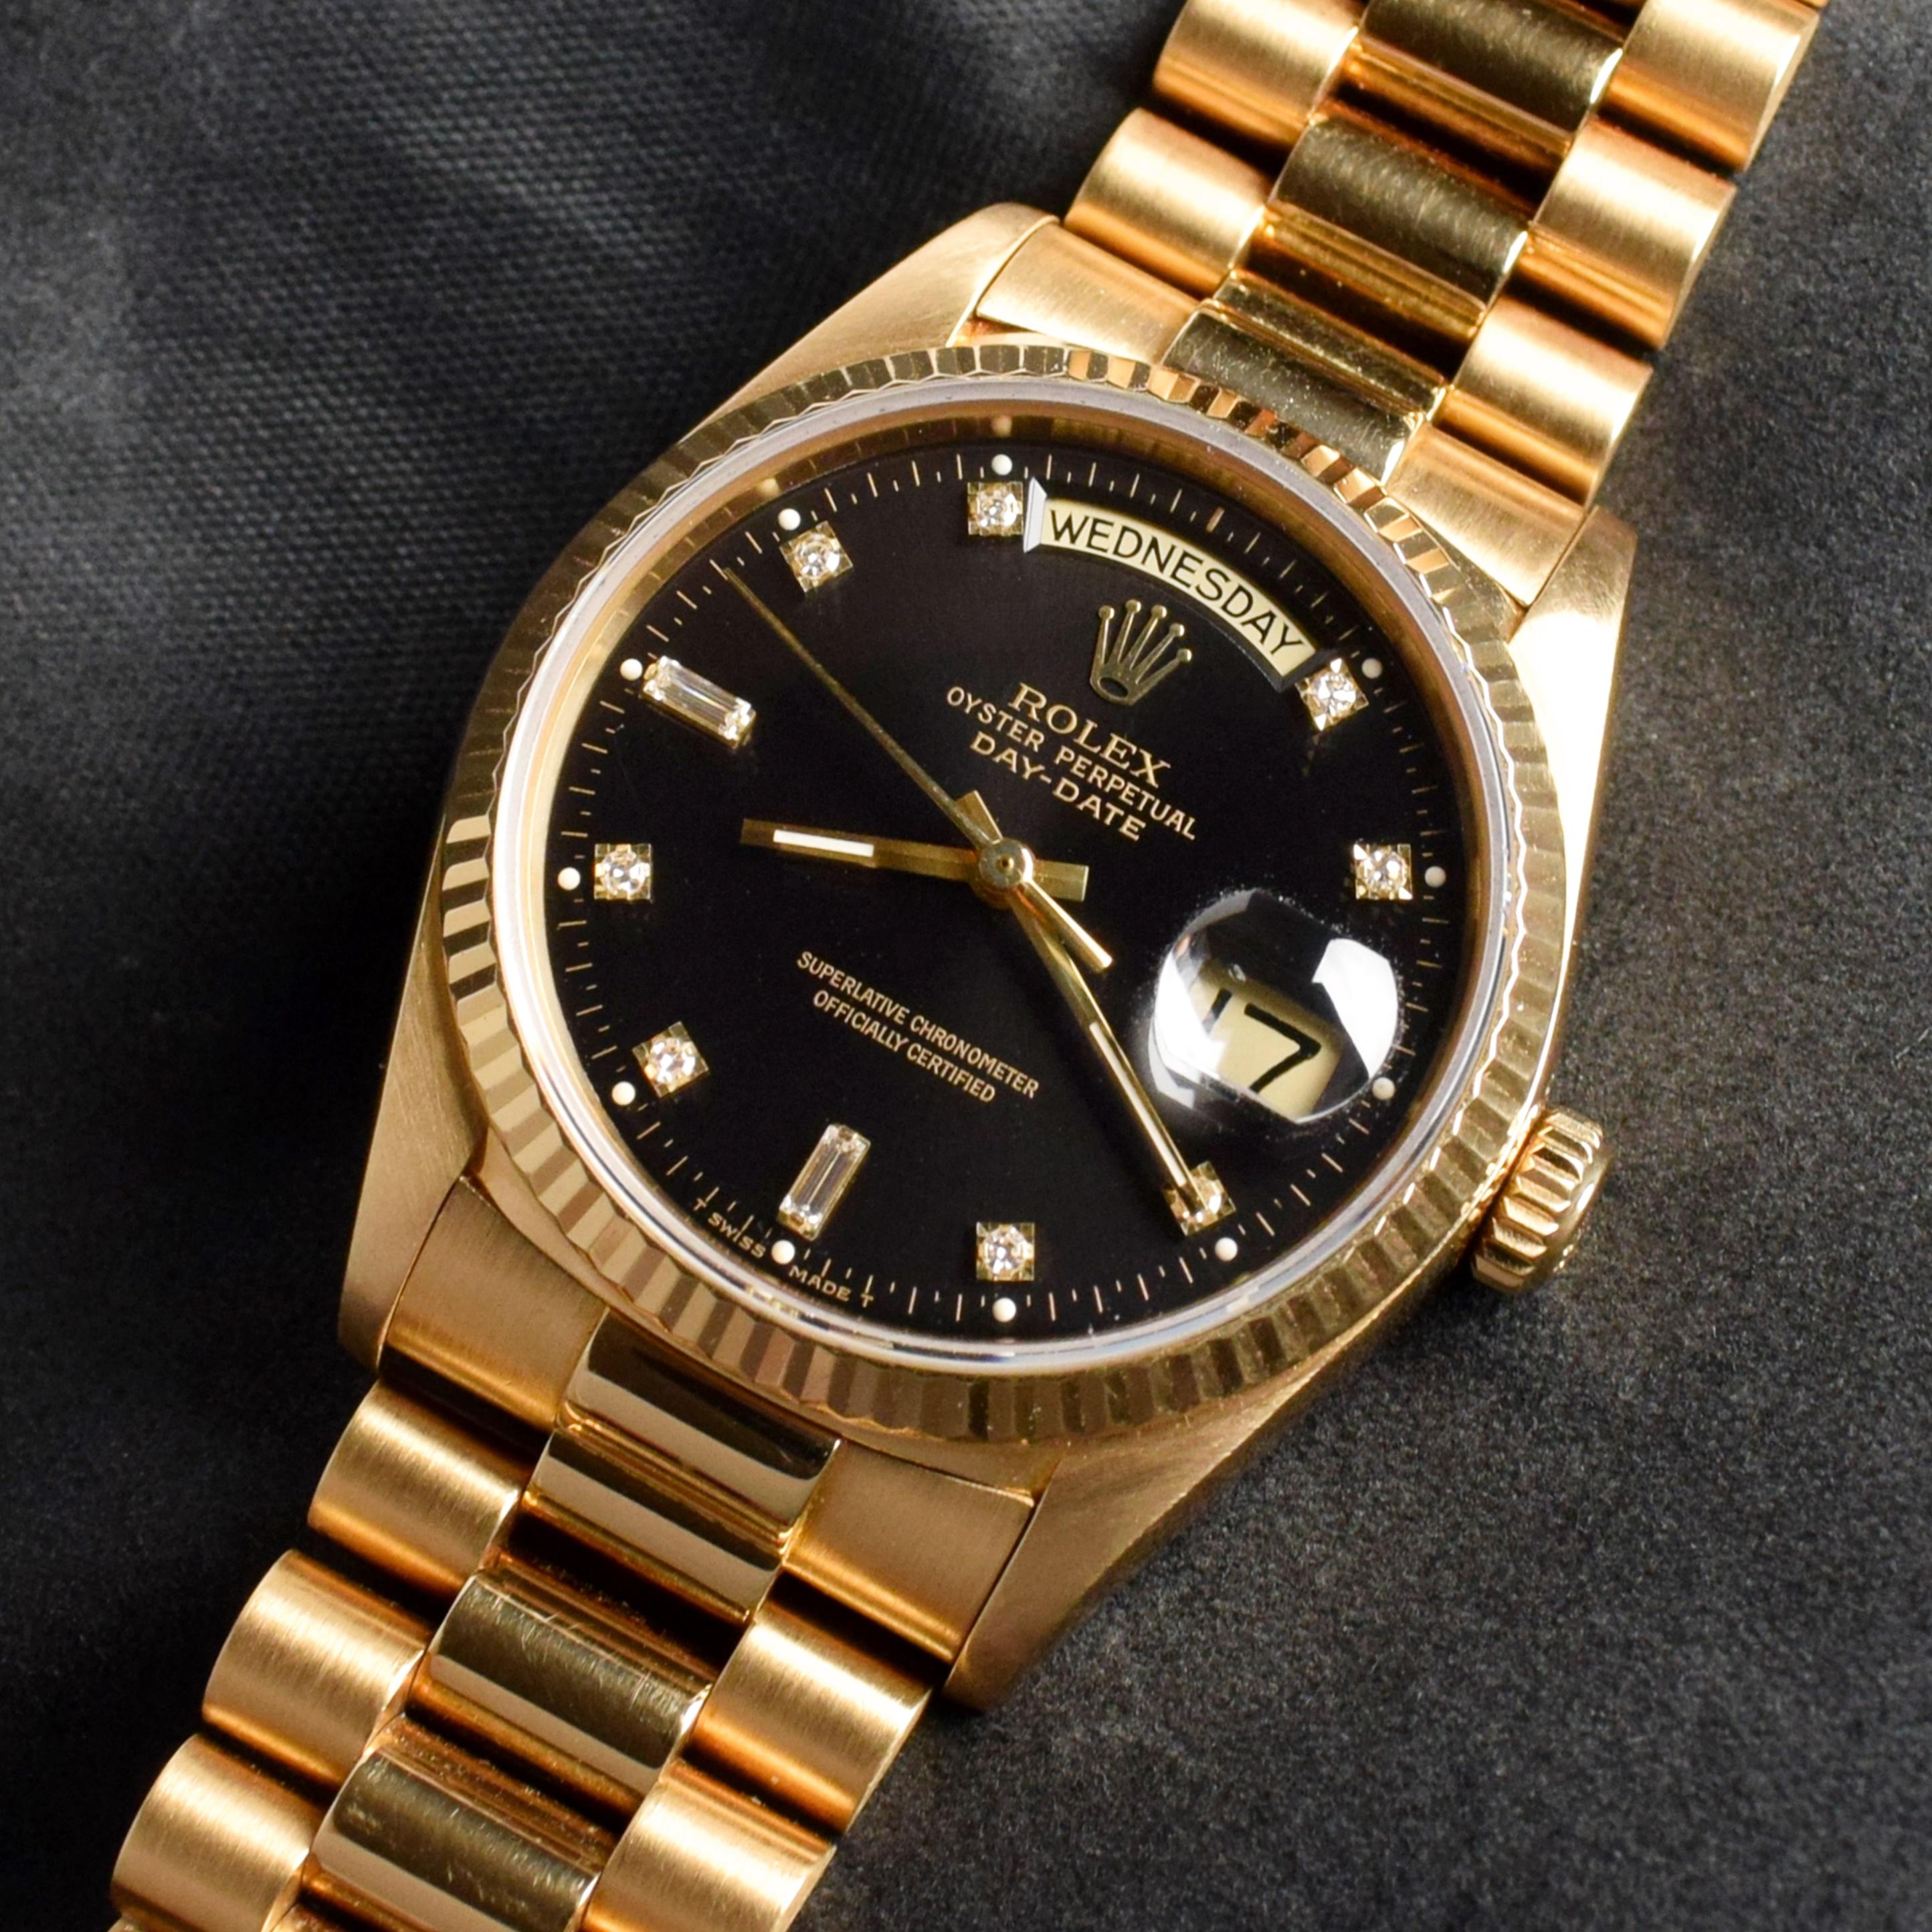 Brand: Vintage Rolex
Model: 18038
Year: 1987
Serial number: 98xxxxx
Reference: C03662
Case: 36mm without crown; Show sign of wear with slight polish from previous; inner case back stamped 18000
Dial: Excellent Condition Black Charcoal Dial w/